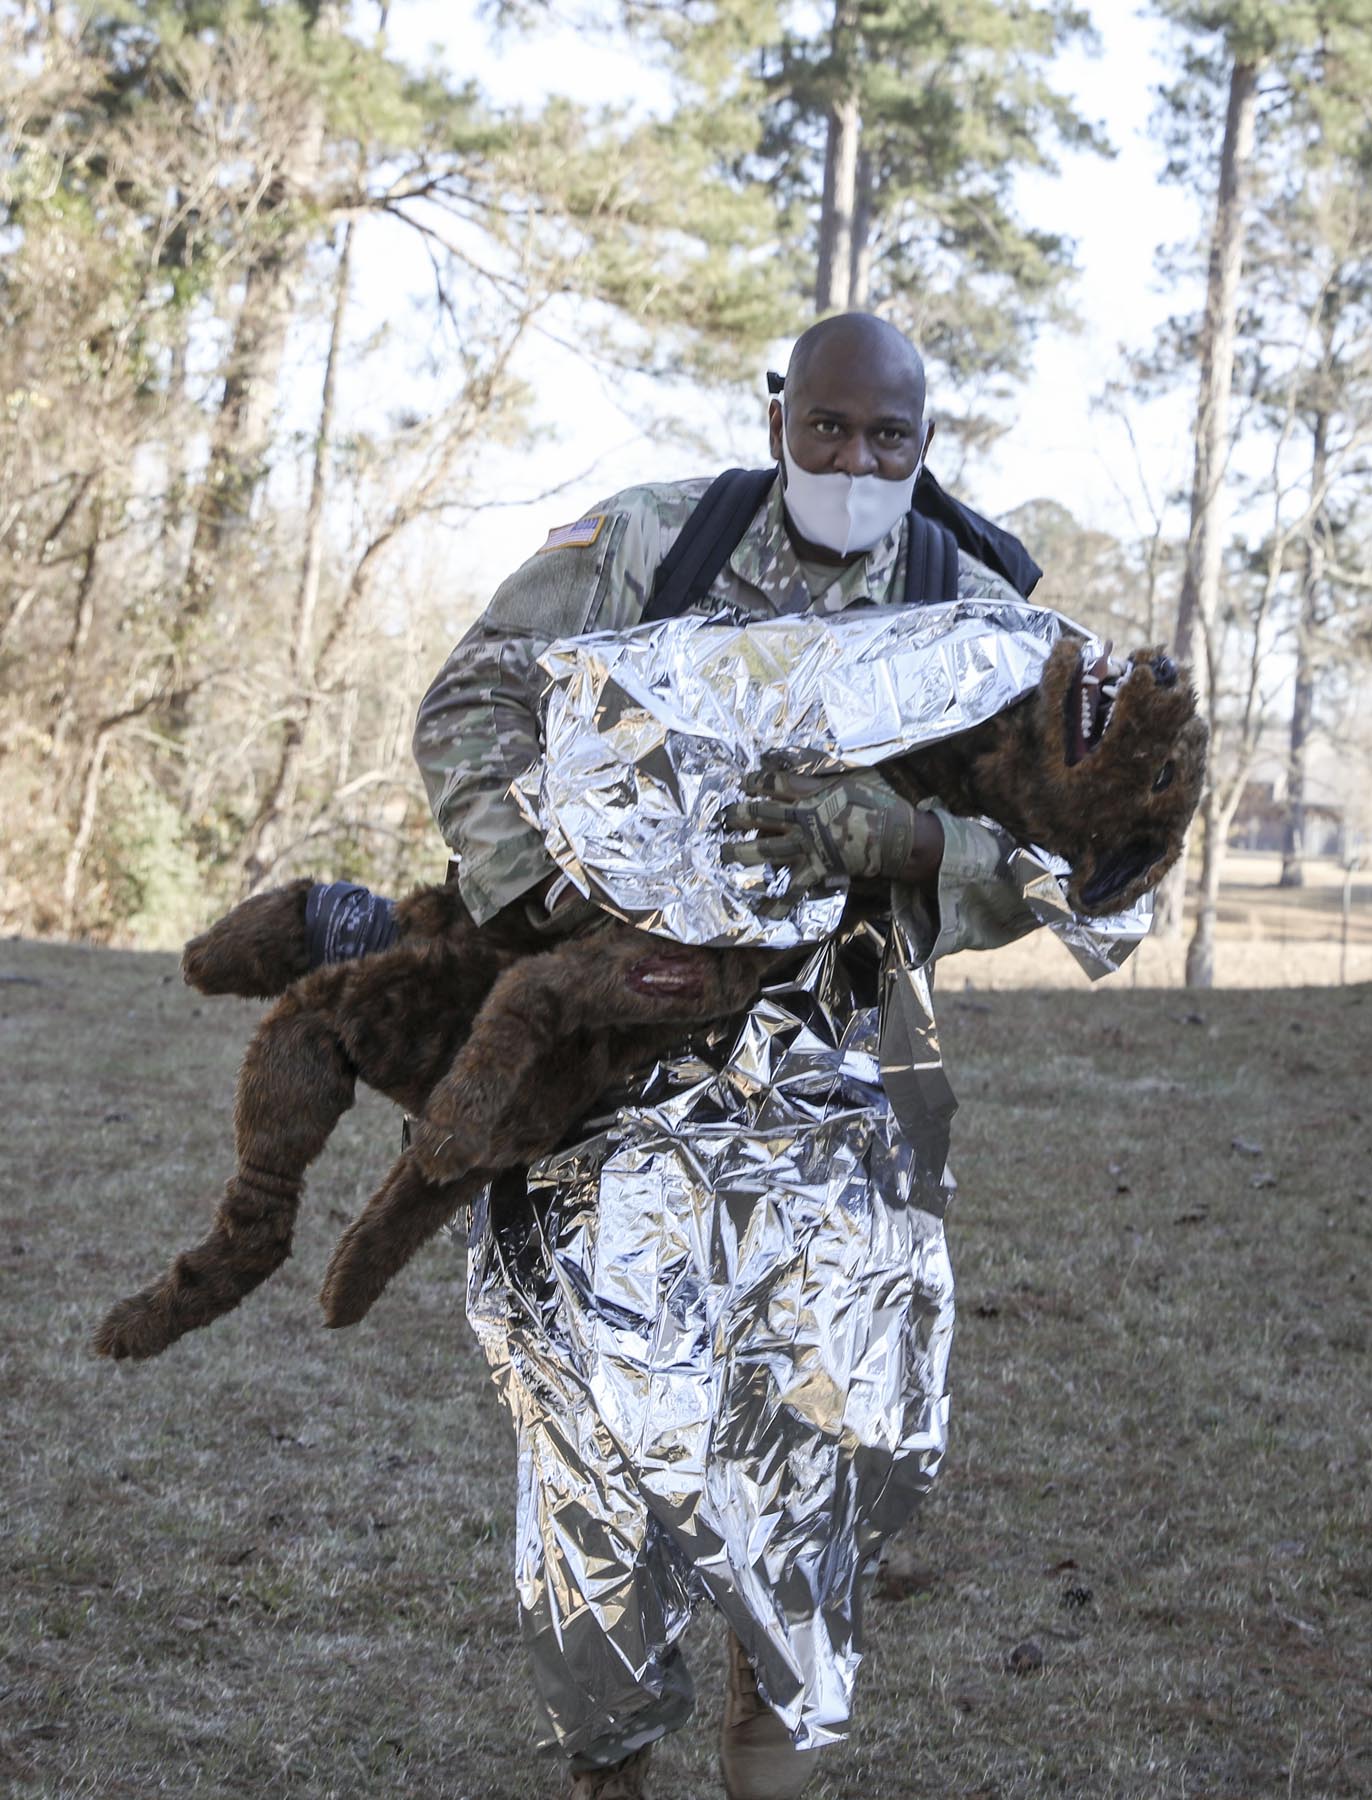 The Louisiana National Guard's Sgt. 1st Class Charles Blackwell, a medic with Headquarters and Headquarters Company 256th Infantry Brigade Combat Team, carries a fake training K9 to the medical evacuation point during a trauma lane exercise at Camp Beauregard in Pineville, La. on Jan. 29, 2022. The K9 Tactical Combat Casualty Care course was added to the LANG's medic sustainment training to teach medics how to properly treat a K9 on the battlefield when no vet is available. Blackwell is a Bogalusa, La. native and was one of 14 medics attending a 10-day medic sustainment course to renew his National Registry of Emergency Medical Technicians and CPR certifications. (U.S. Army National Guard photo by Staff Sgt. Noshoba Davis)